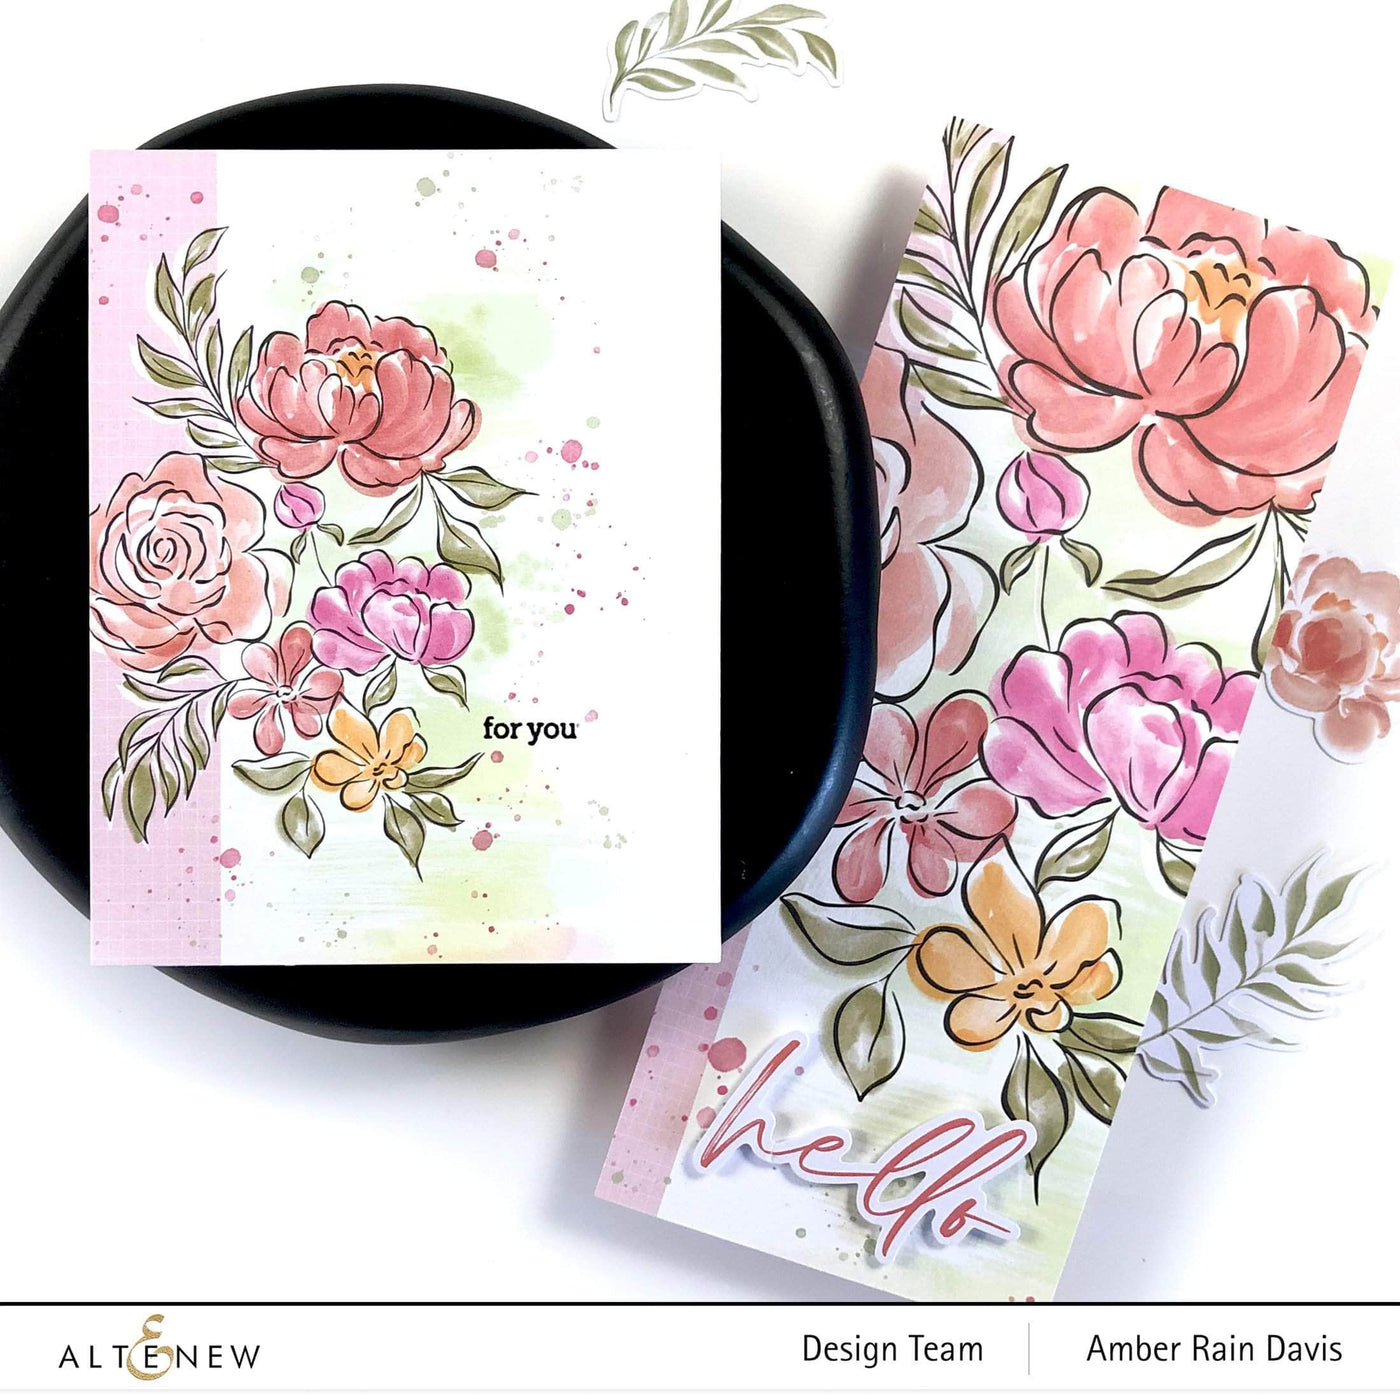 Pattern Paper Celebrate: This Story 12x12 Paper Pack (25 sheets)